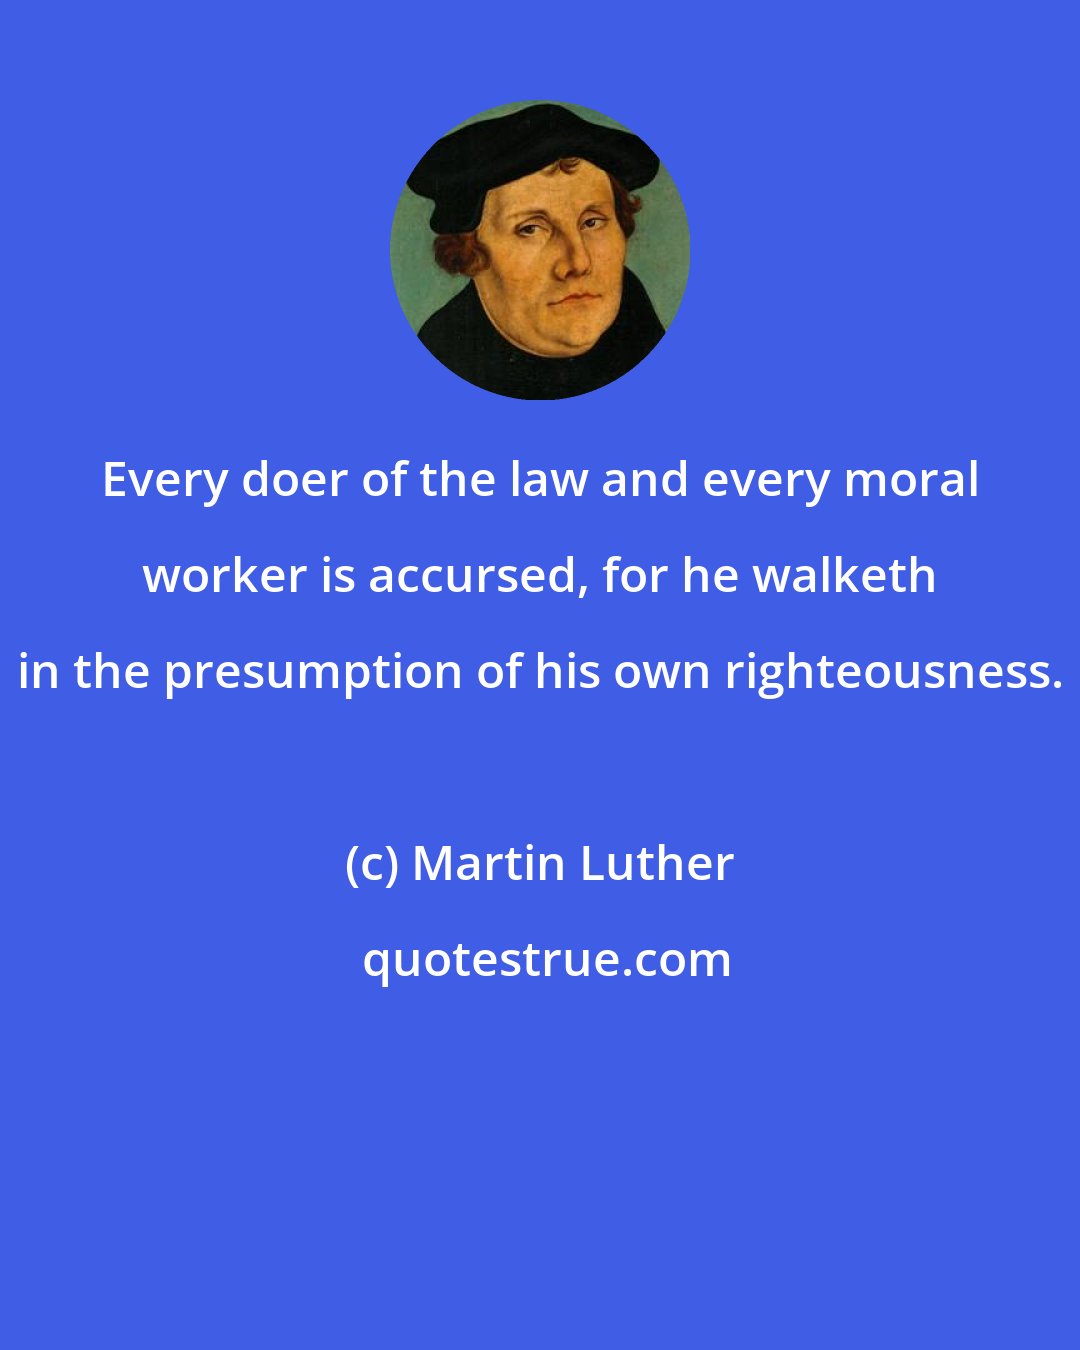 Martin Luther: Every doer of the law and every moral worker is accursed, for he walketh in the presumption of his own righteousness.